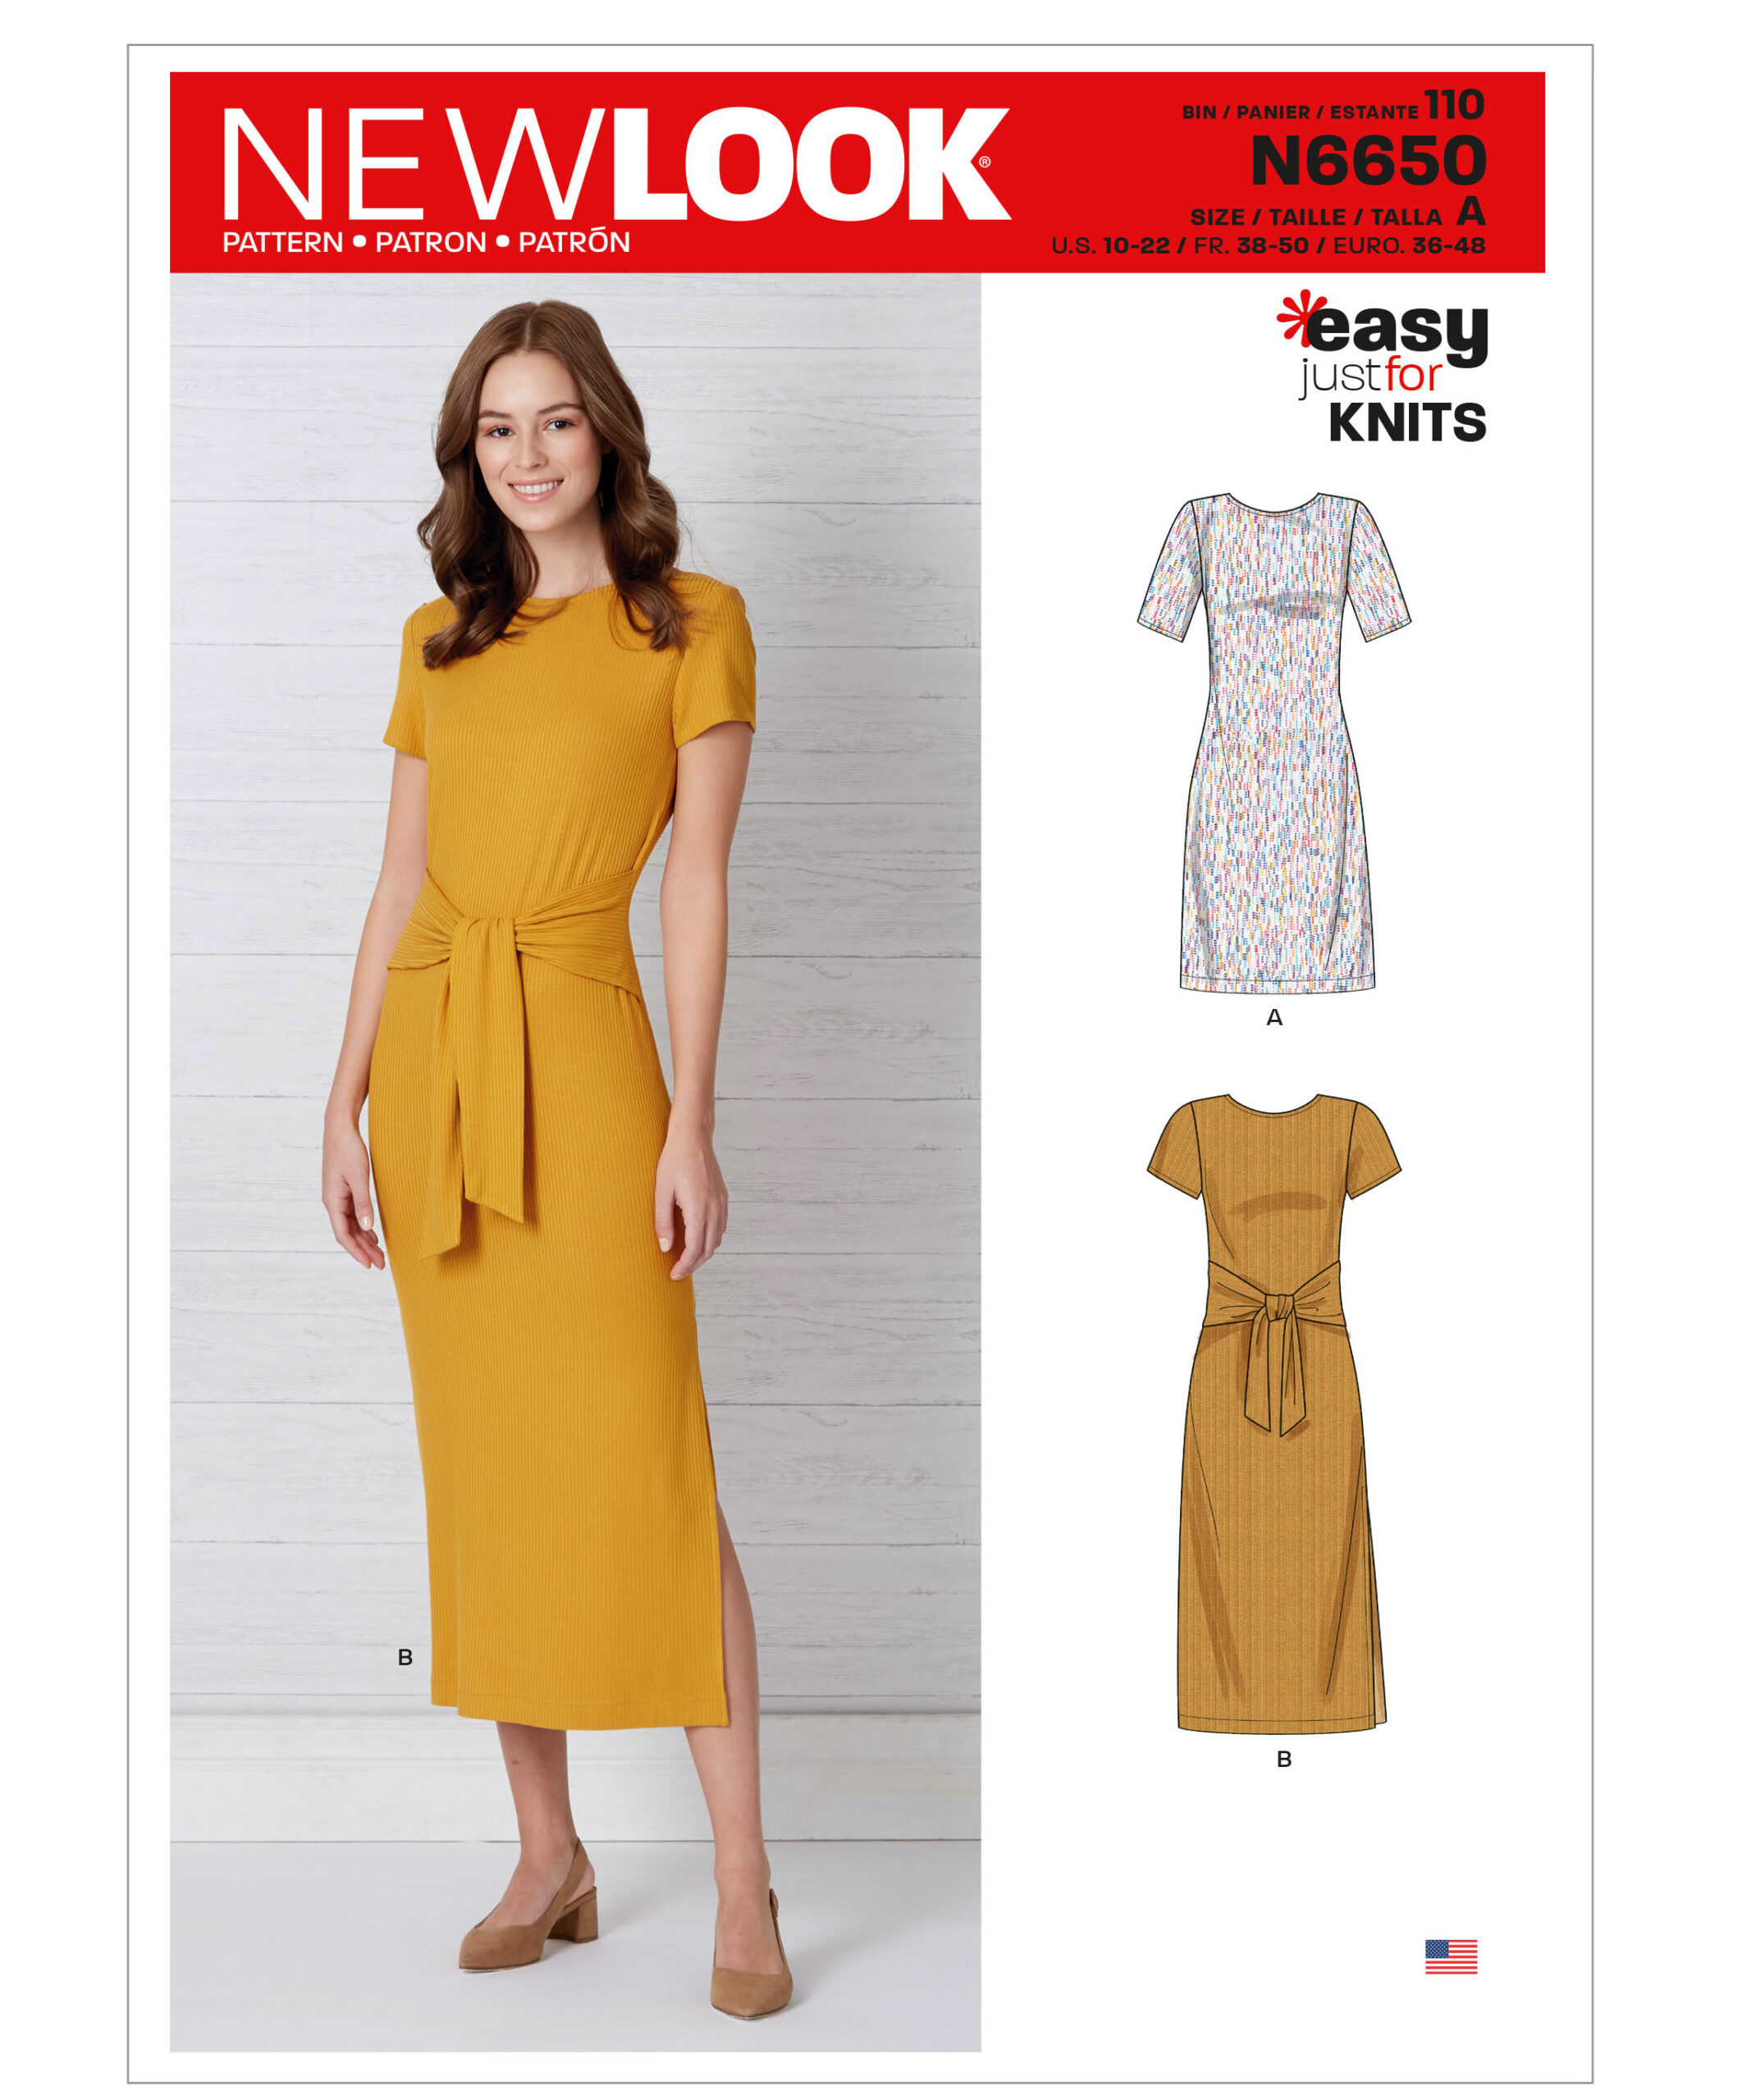 New Look 6679 Misses' Knee Length Dress With Sleeve Variations